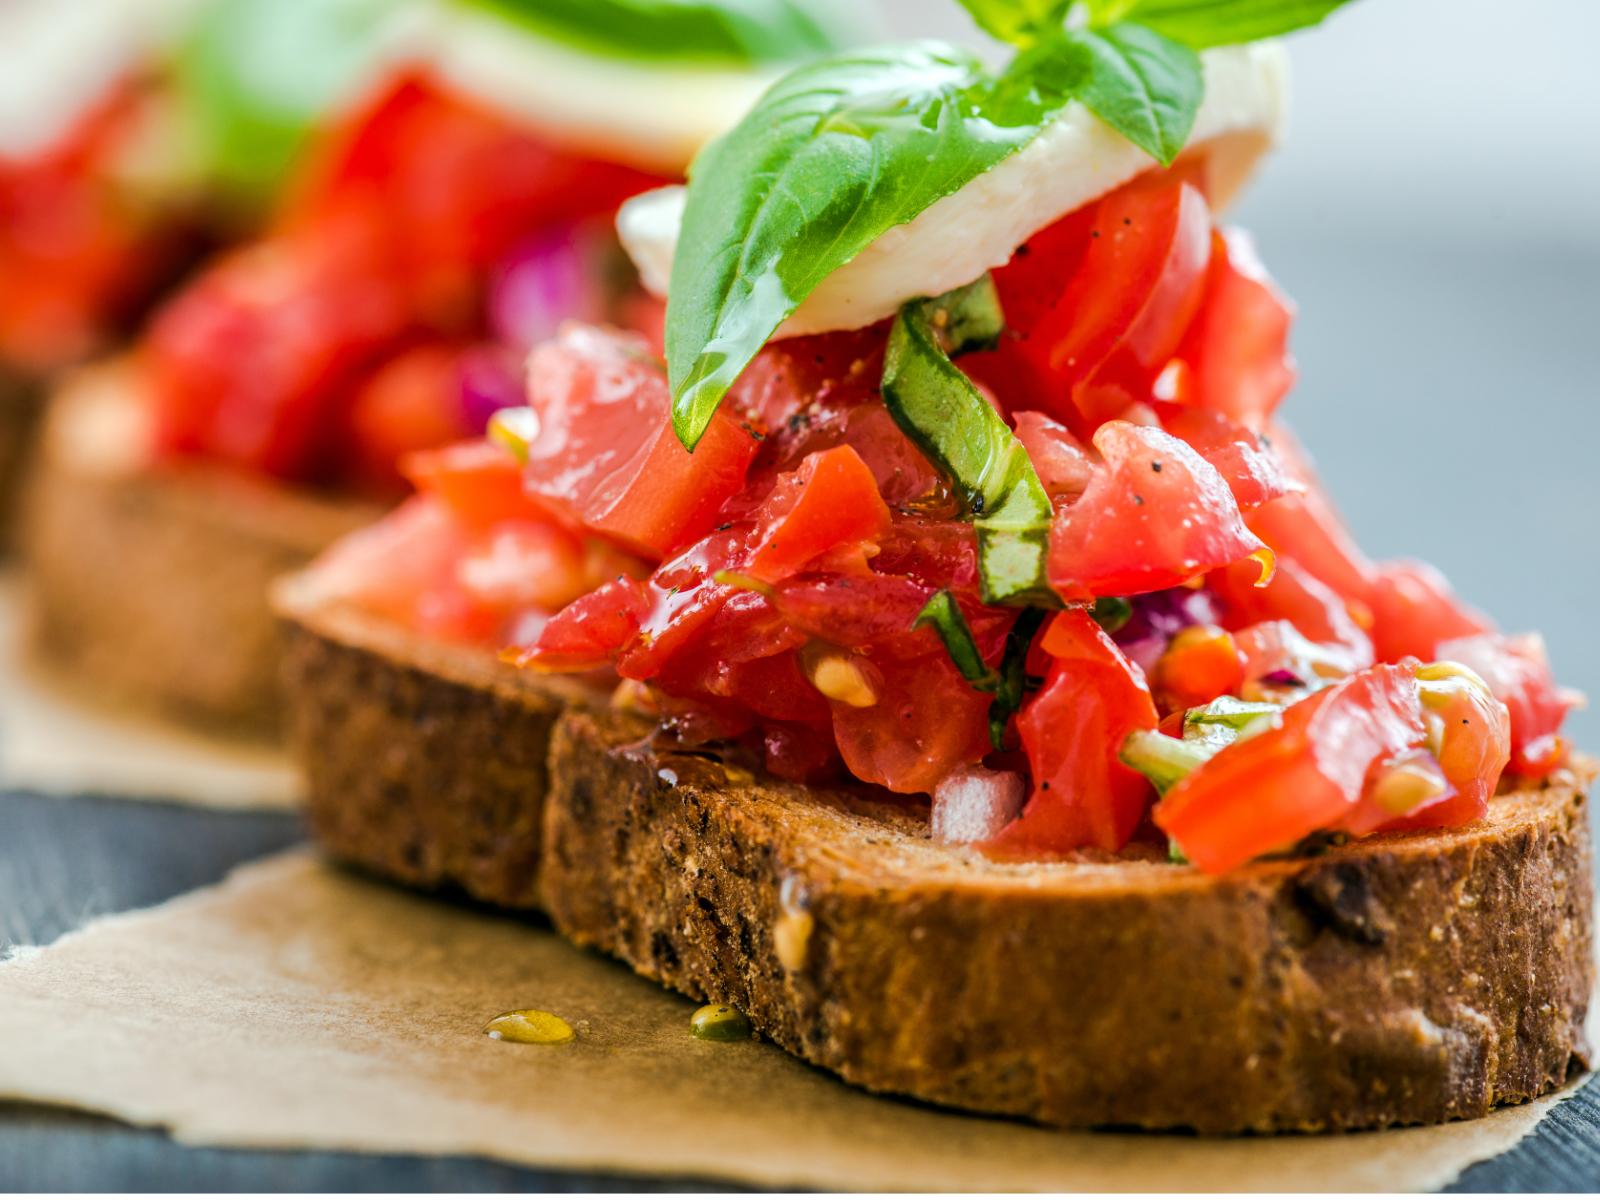 bruschetta slice with tomatoes and basil